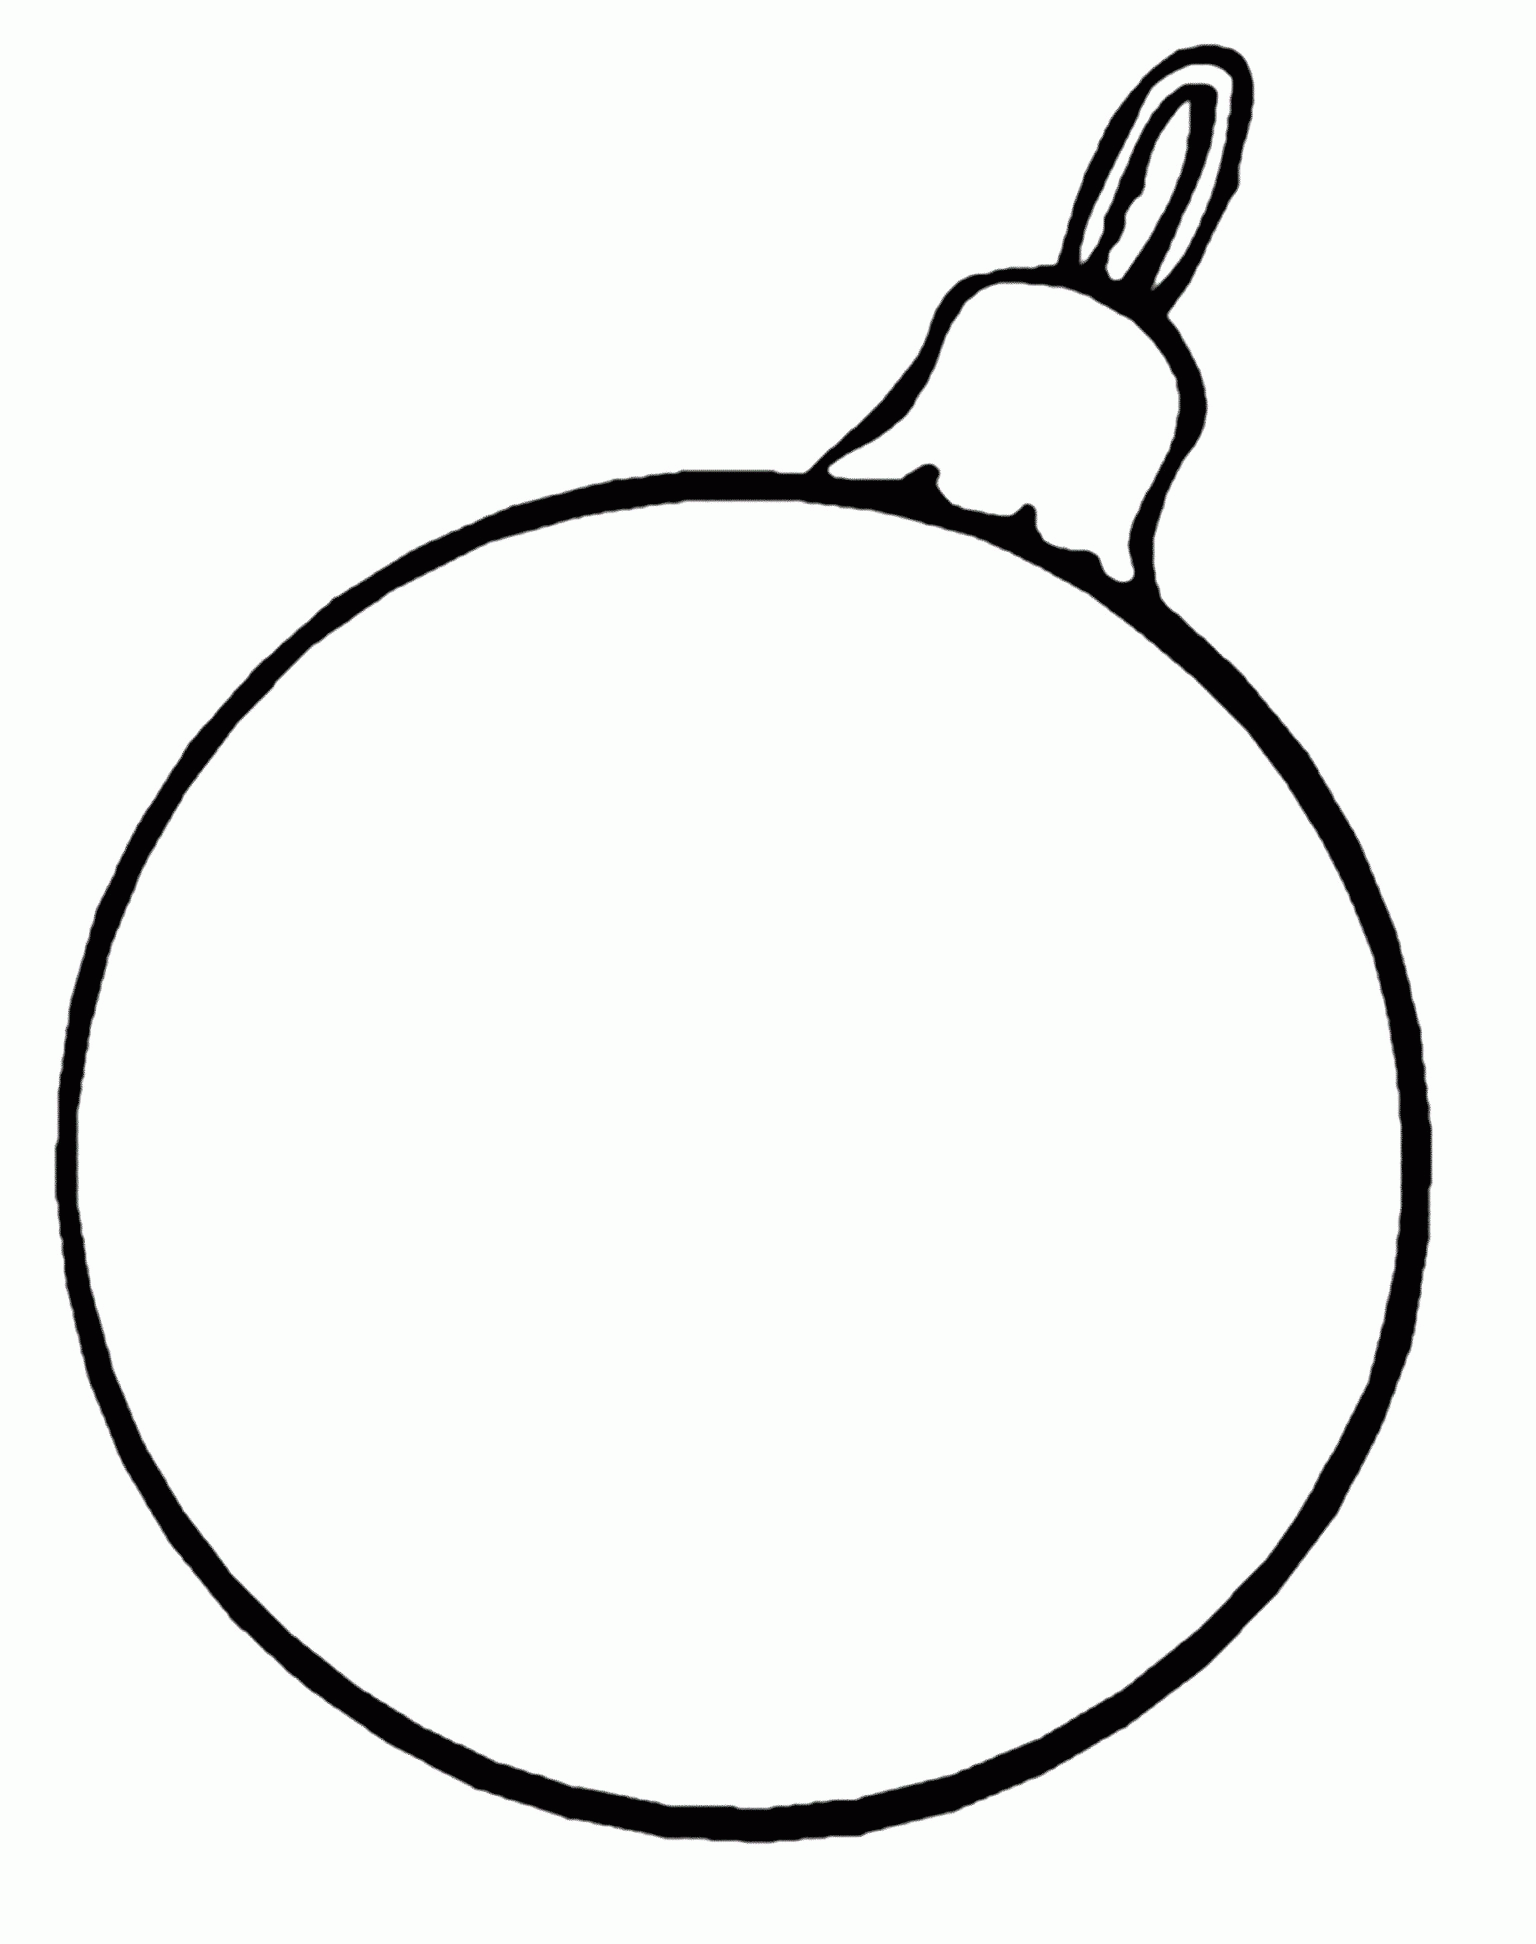 Christmas Decorations Coloring Sheets : A Little Girl With ...